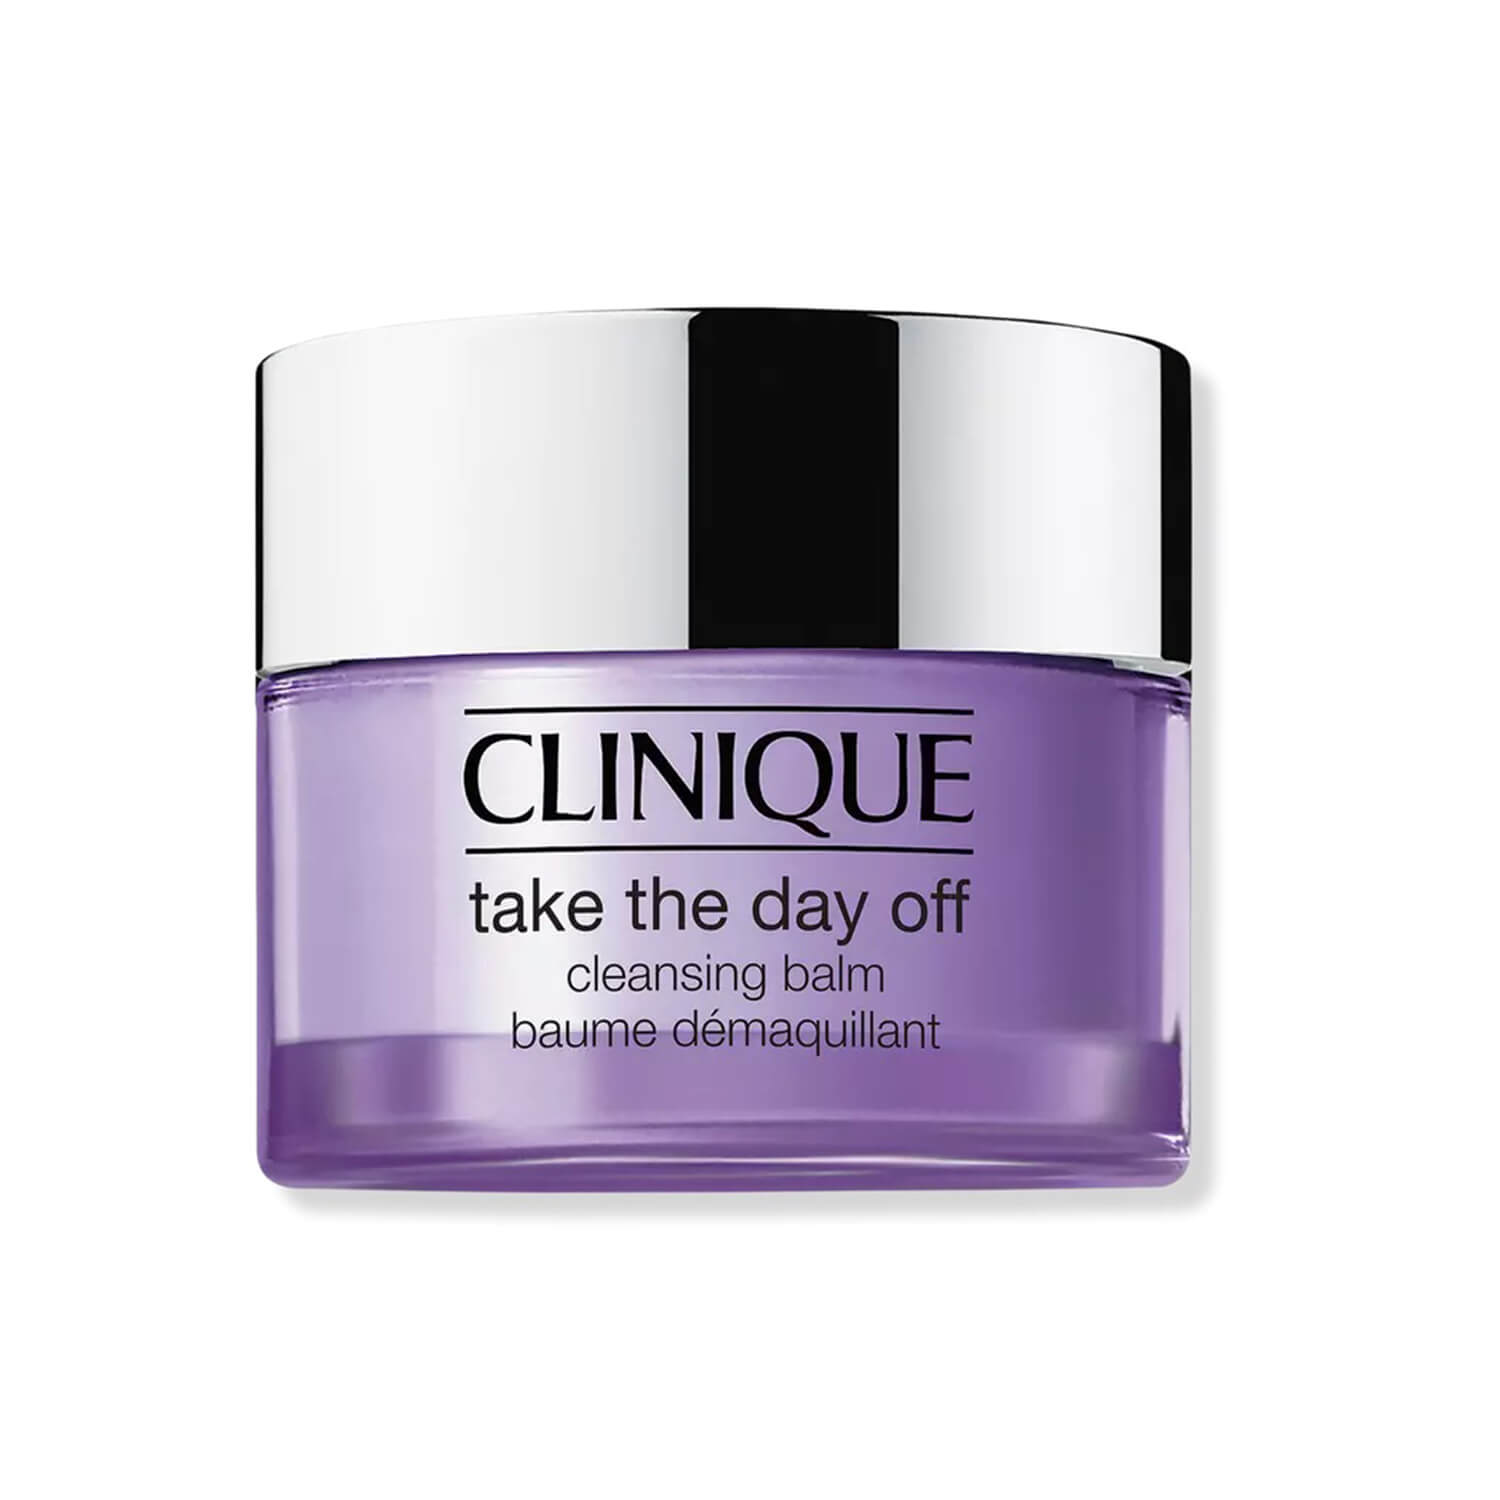 shop Clinique Take the Day off Cleansing Balm available at heygirl.pk for delivery in pakistan